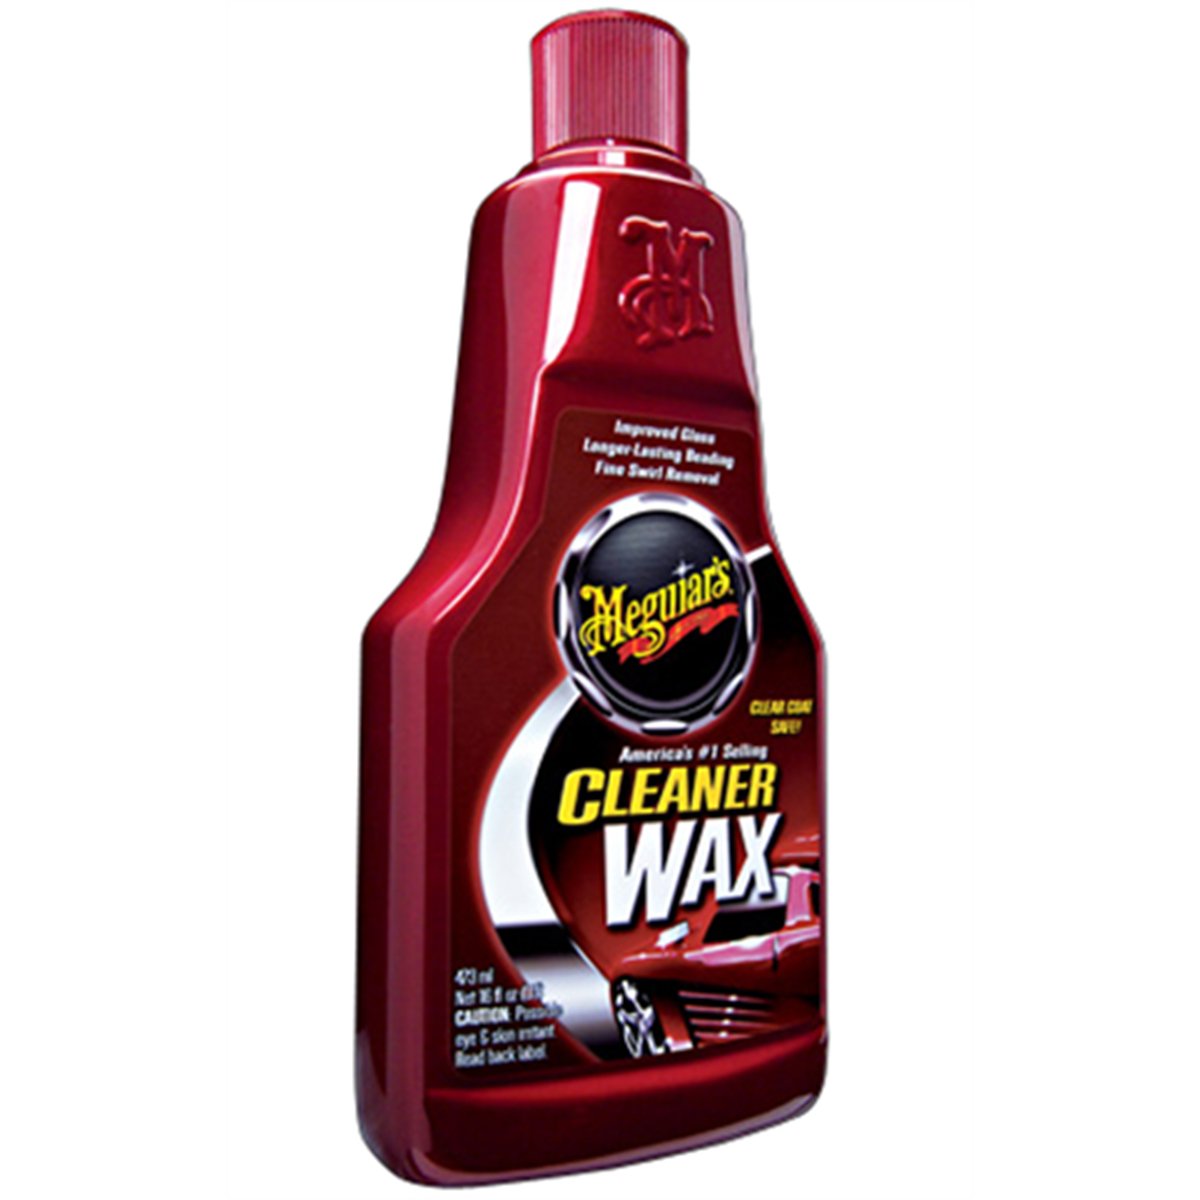 Meguiar's Cleaner Wax Liquid Wax Cleans, Shines and Protects in One Easy Step A1216, 16 oz - image 1 of 4